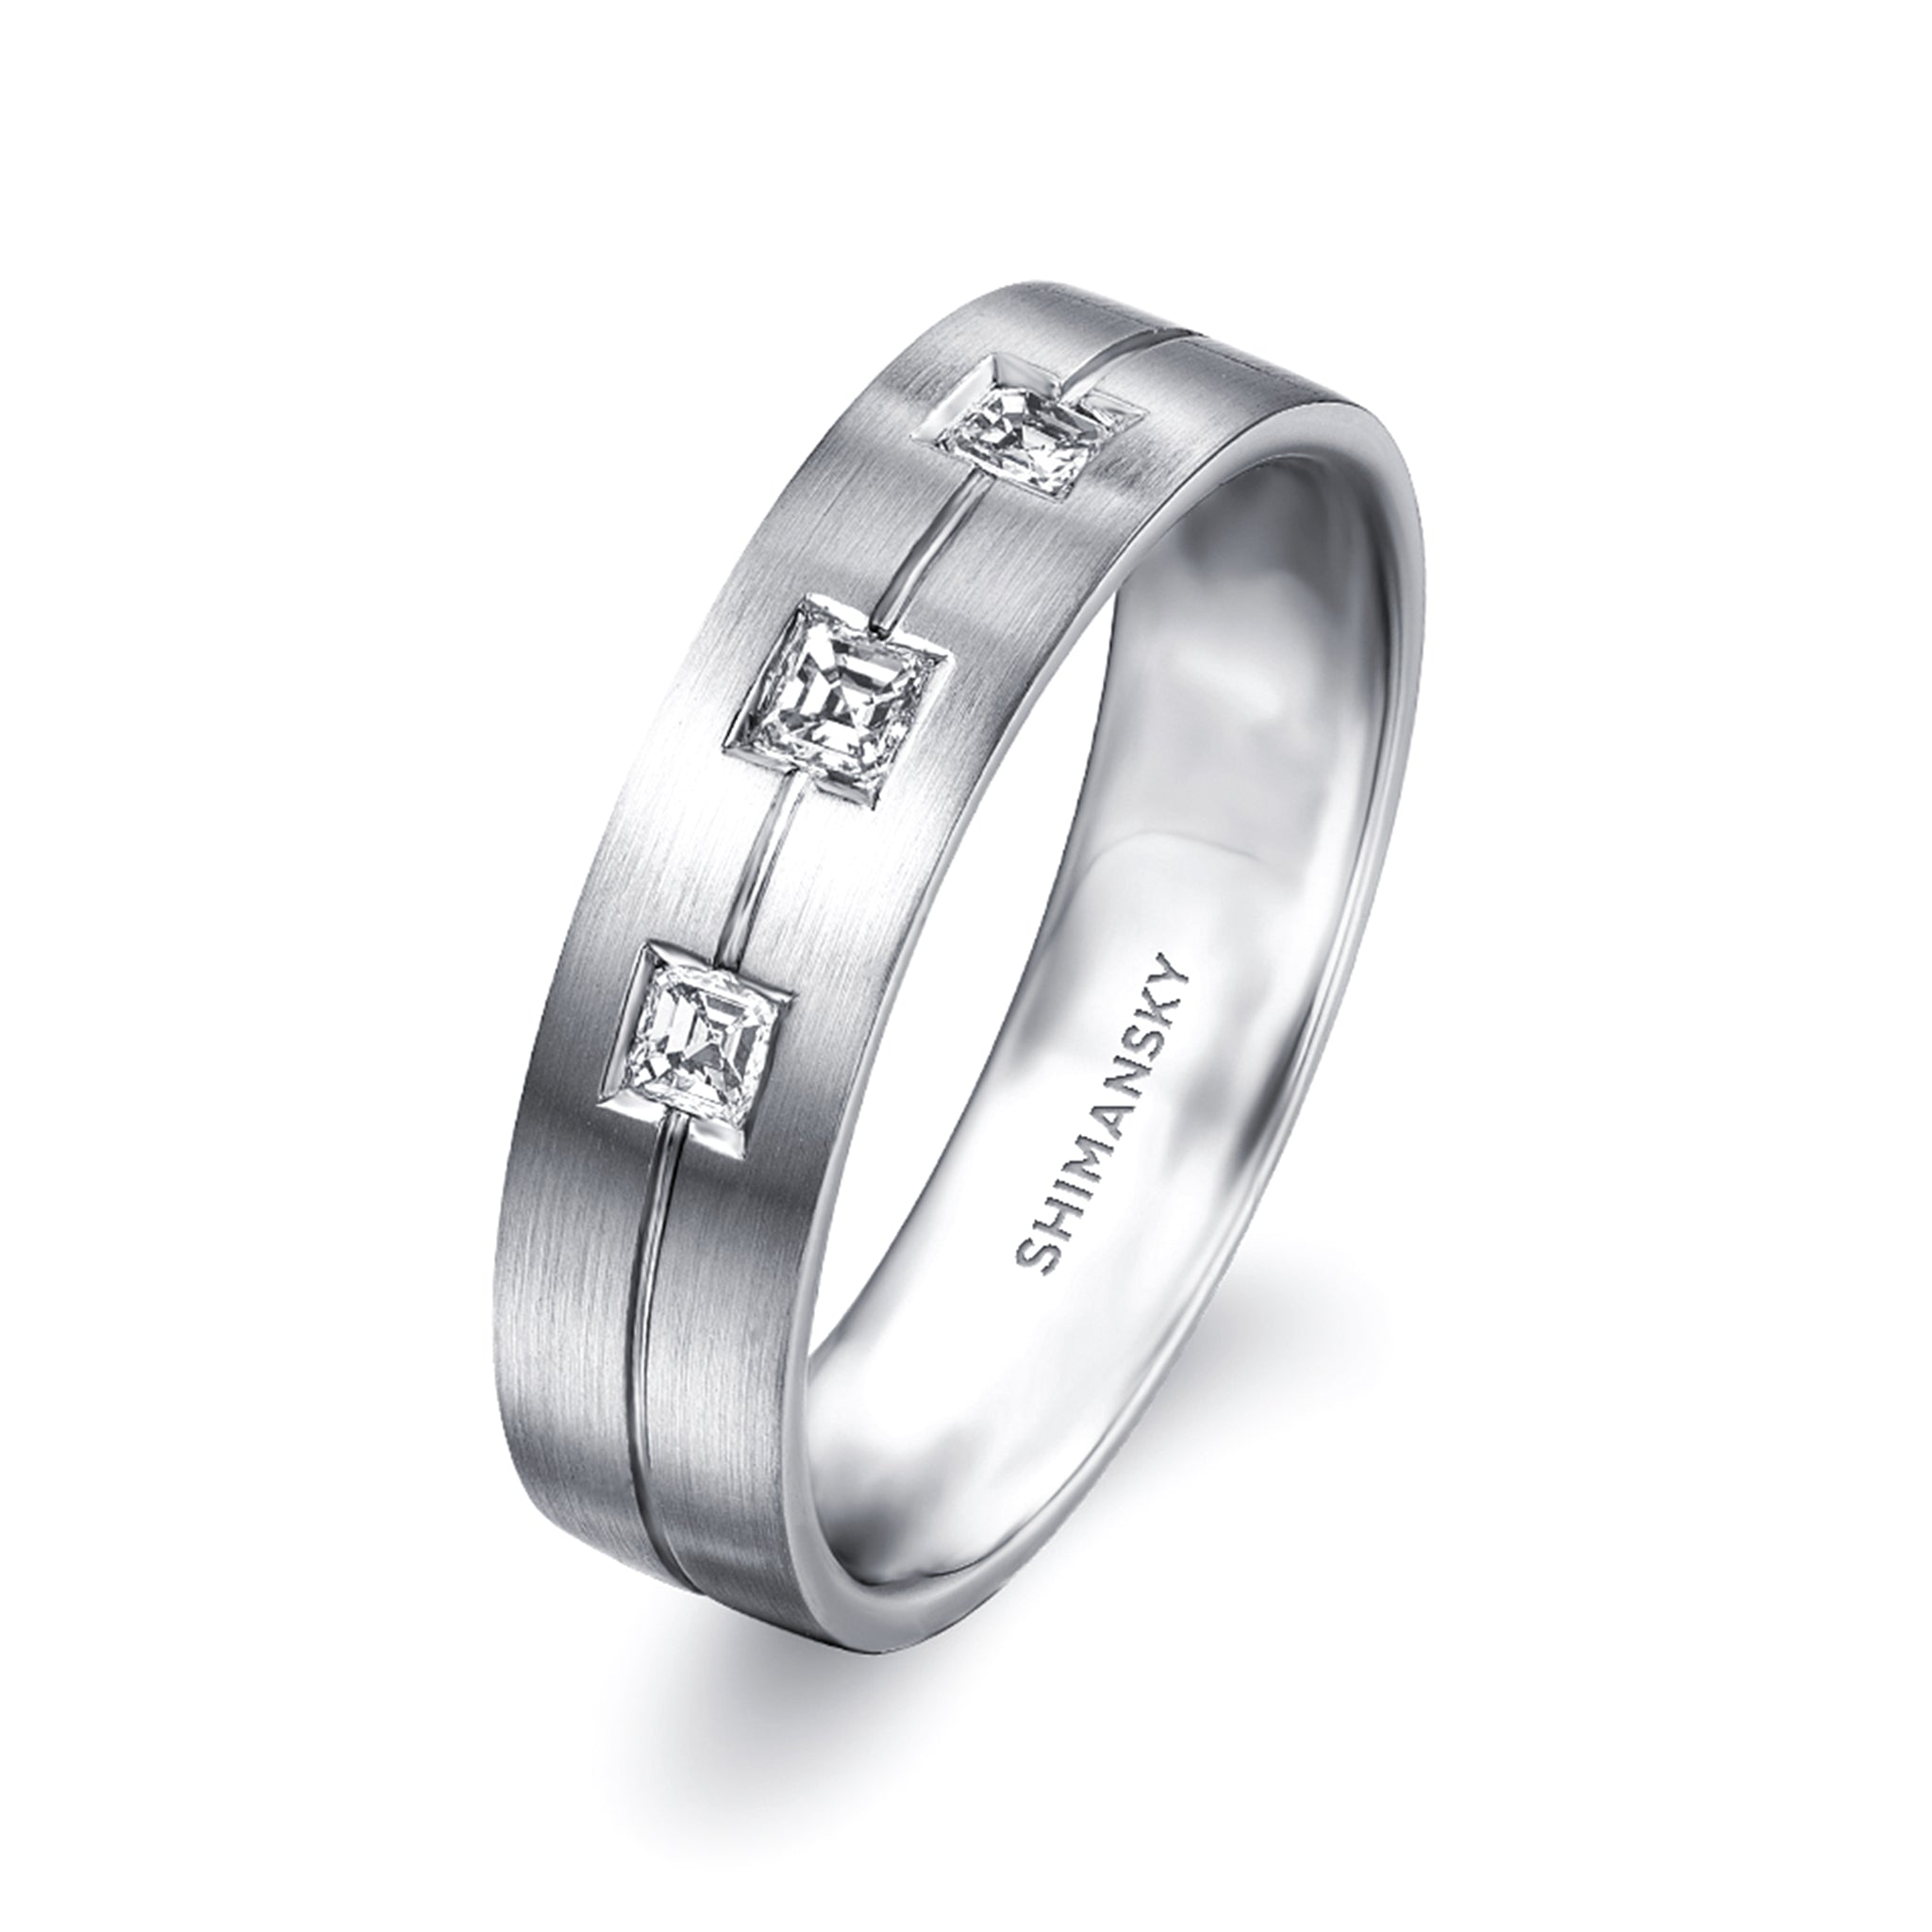 Shimansky - Max-Line Trio Square Diamond Grooved Wedding Band in Brushed Palladium